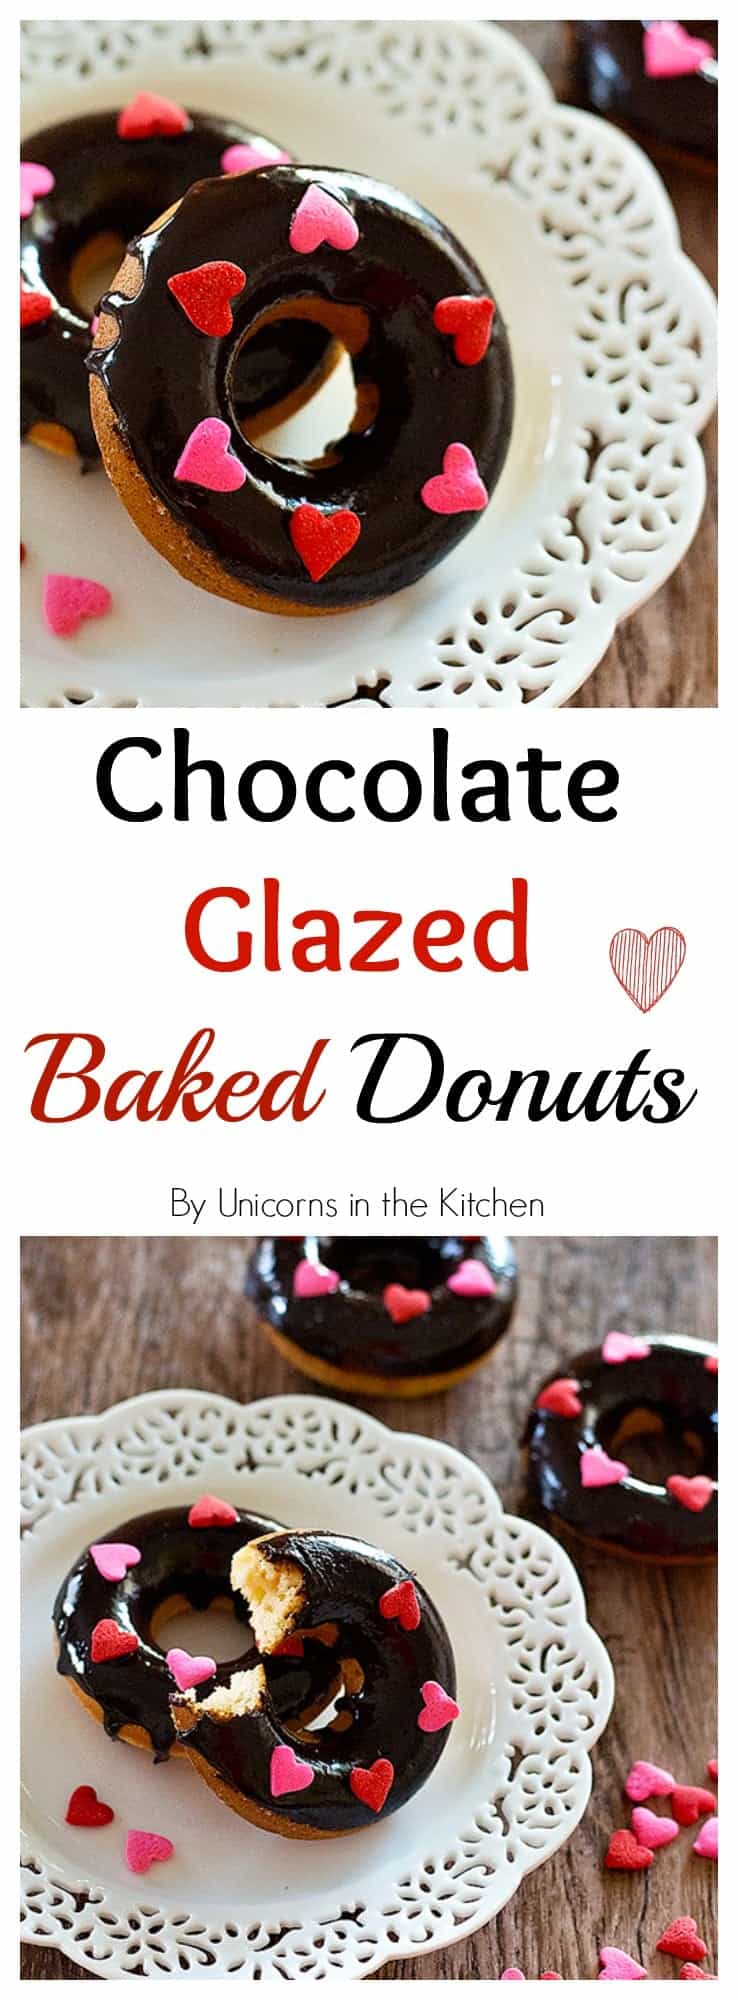 These chocolate glazed baked donuts will be your new favorite donuts! No frying required so you can just make them in big batches and enjoy having delicious donuts! 